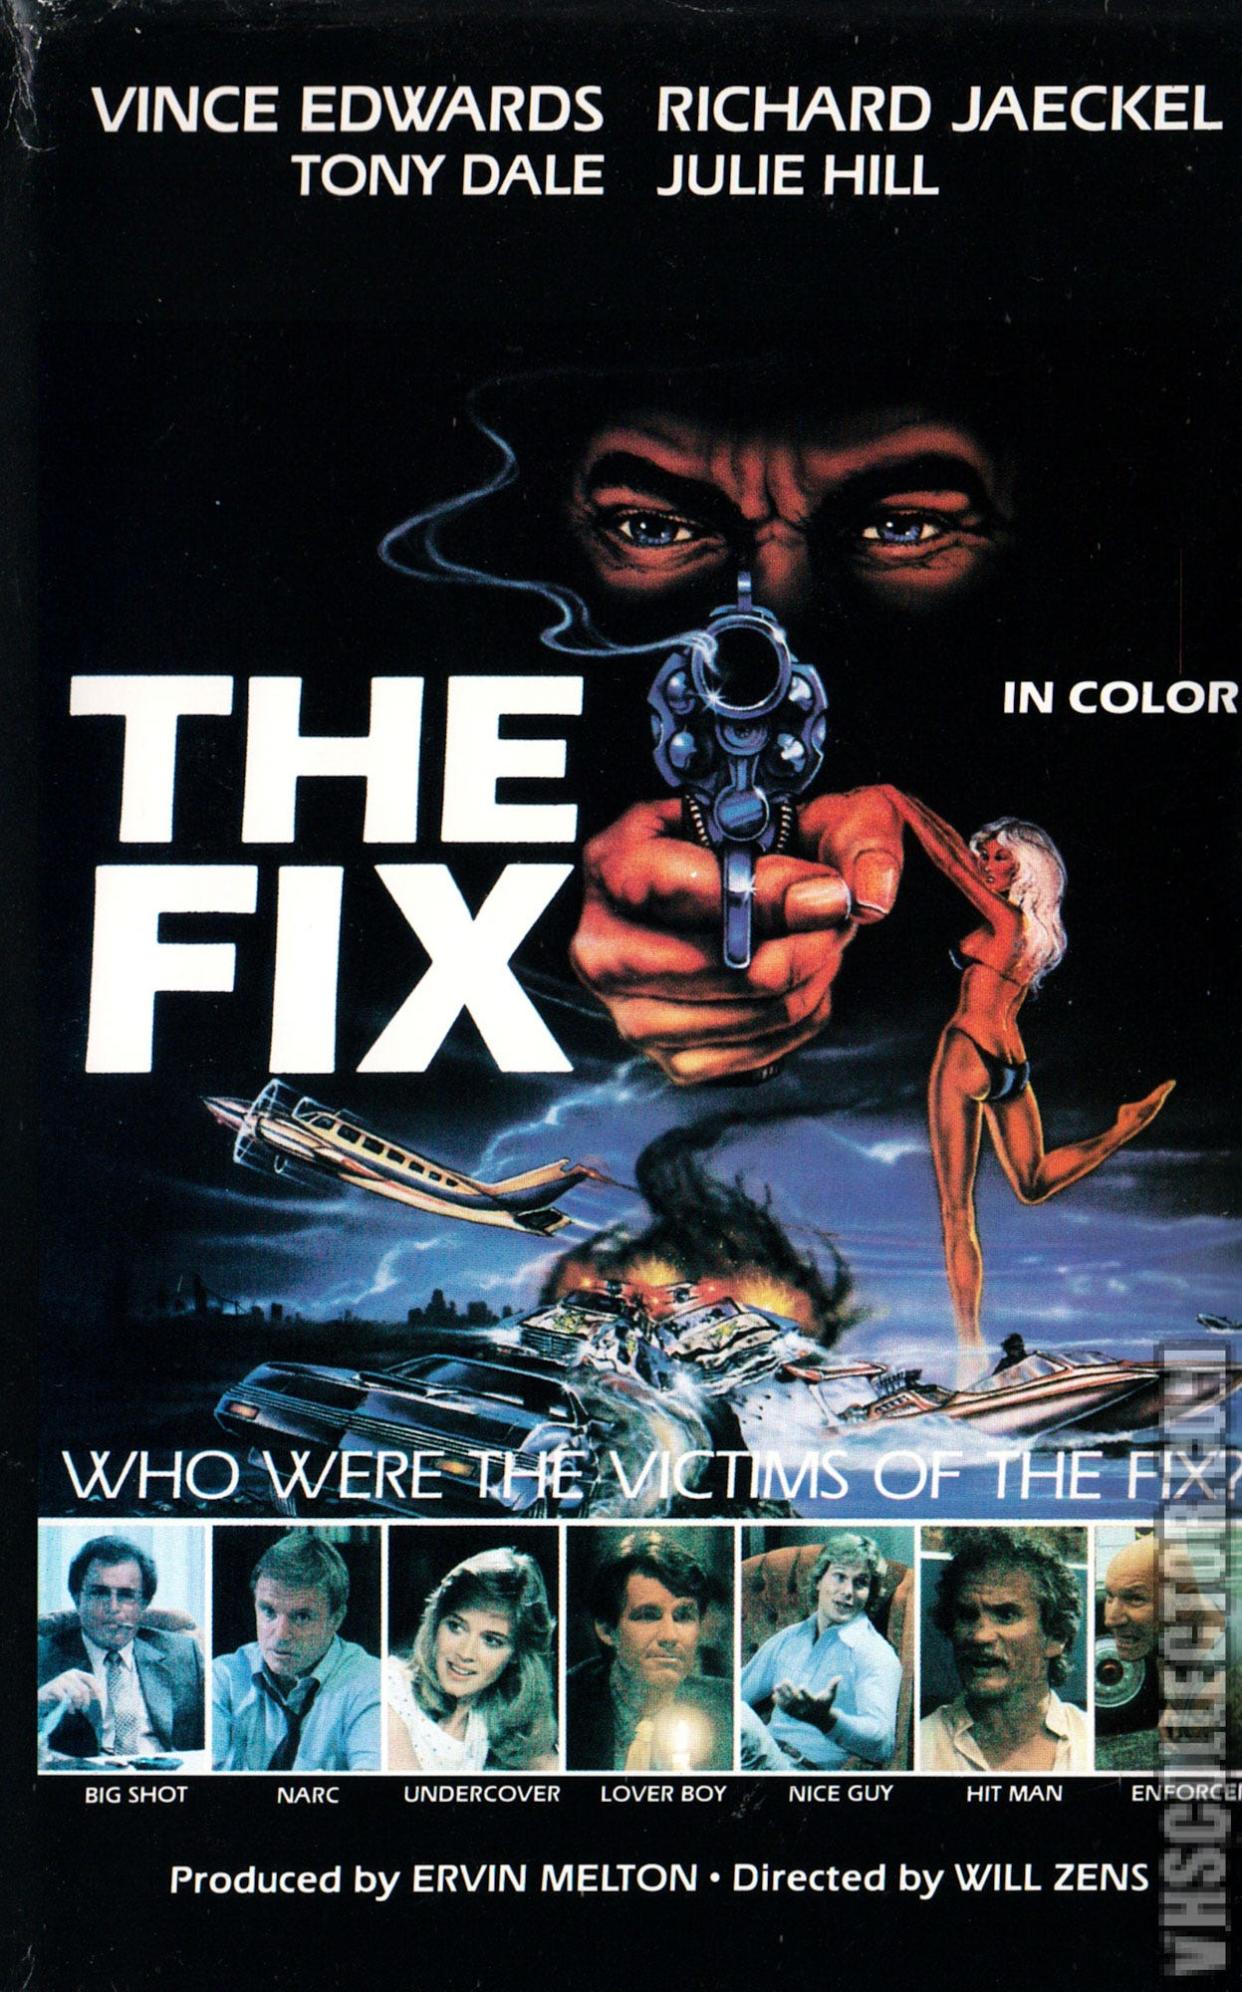 VHS jacket art for "The Fix," which shot in Wilmington in 1983.